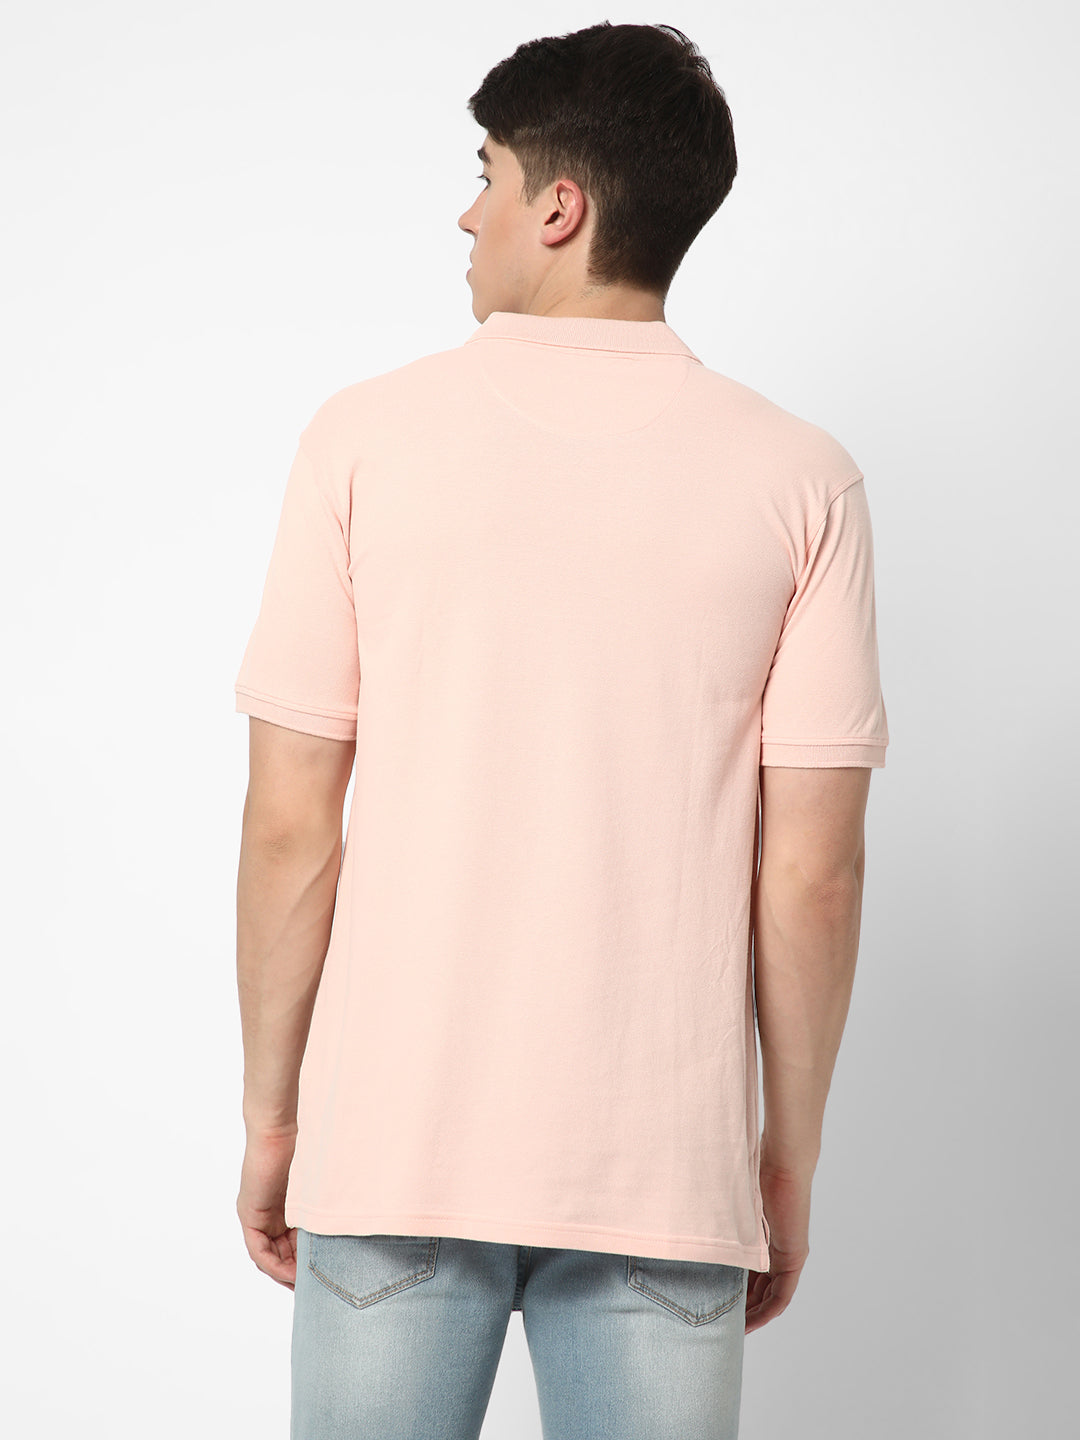 Cotstyle Cotton Fabrics Polo Short Length Plain Half Sleeve Casual & Daily Wear Men's T Shirts - Pack of 1 - Imp Pink Colour